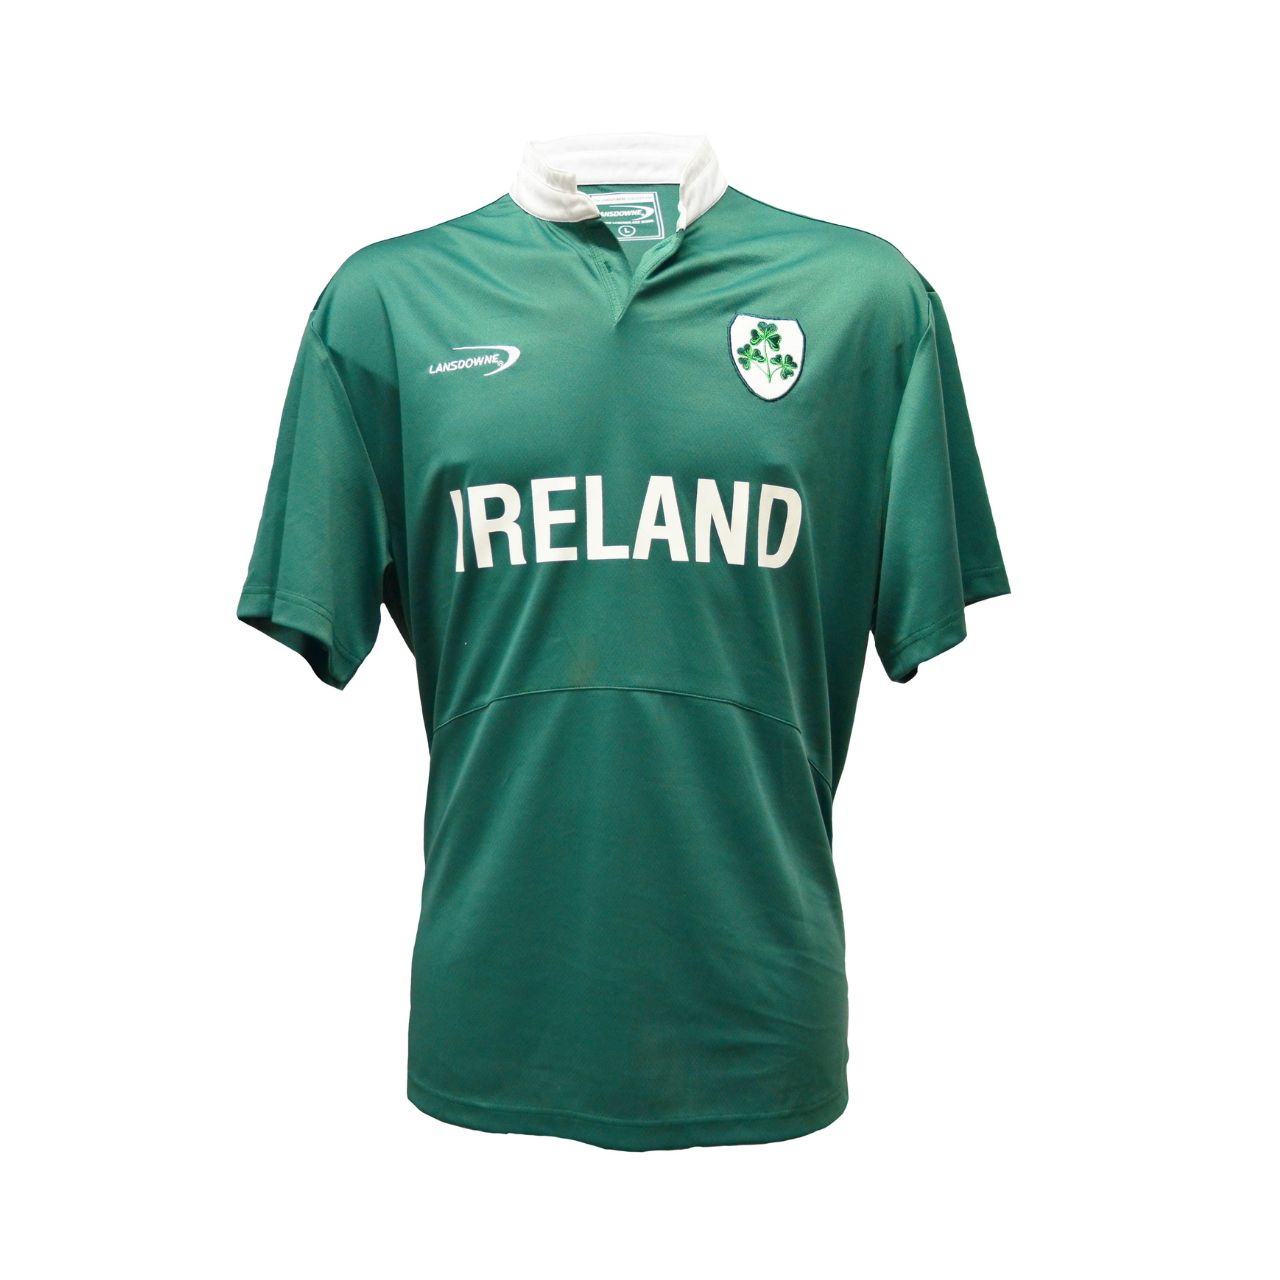 Lansdowne Green Ireland Shamrock Performance Short Sleeve Rugby Shirt  This smooth and comfortable Drylans performance top is made of 100% polyester that wicks away moisture and helps maintain the core temperature, which is ideal for the whole day, especially outdoors on hot days or for outdoor sporting activities.